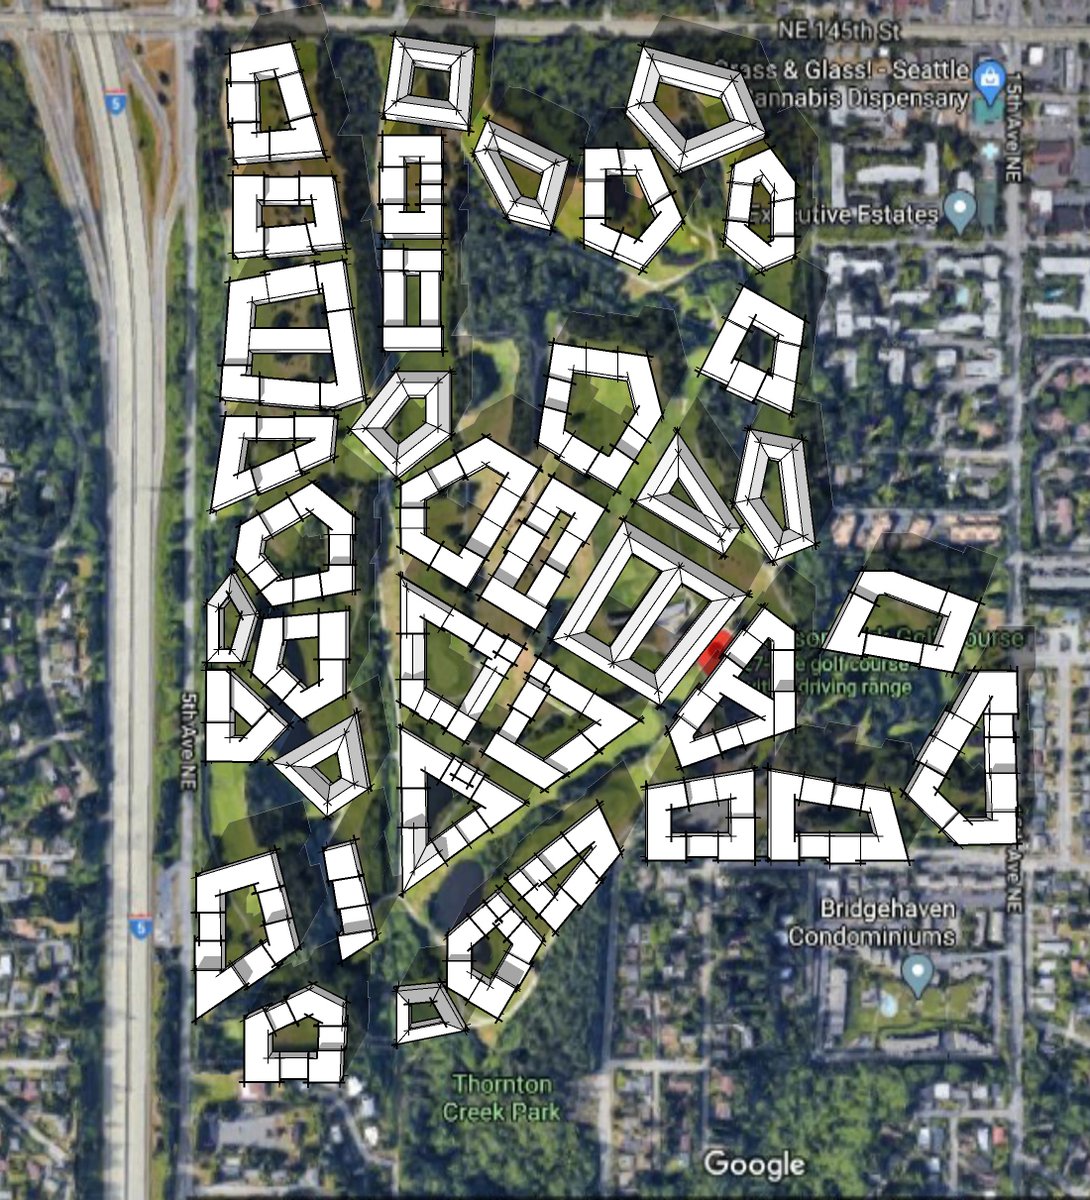 What if we took a 160 acre golf course and repurposed it for housing and saved 95% of all the trees? Now you have 40,000 people living on two future light rail stops with a wonderful tree-lined dense walkable neighborhood